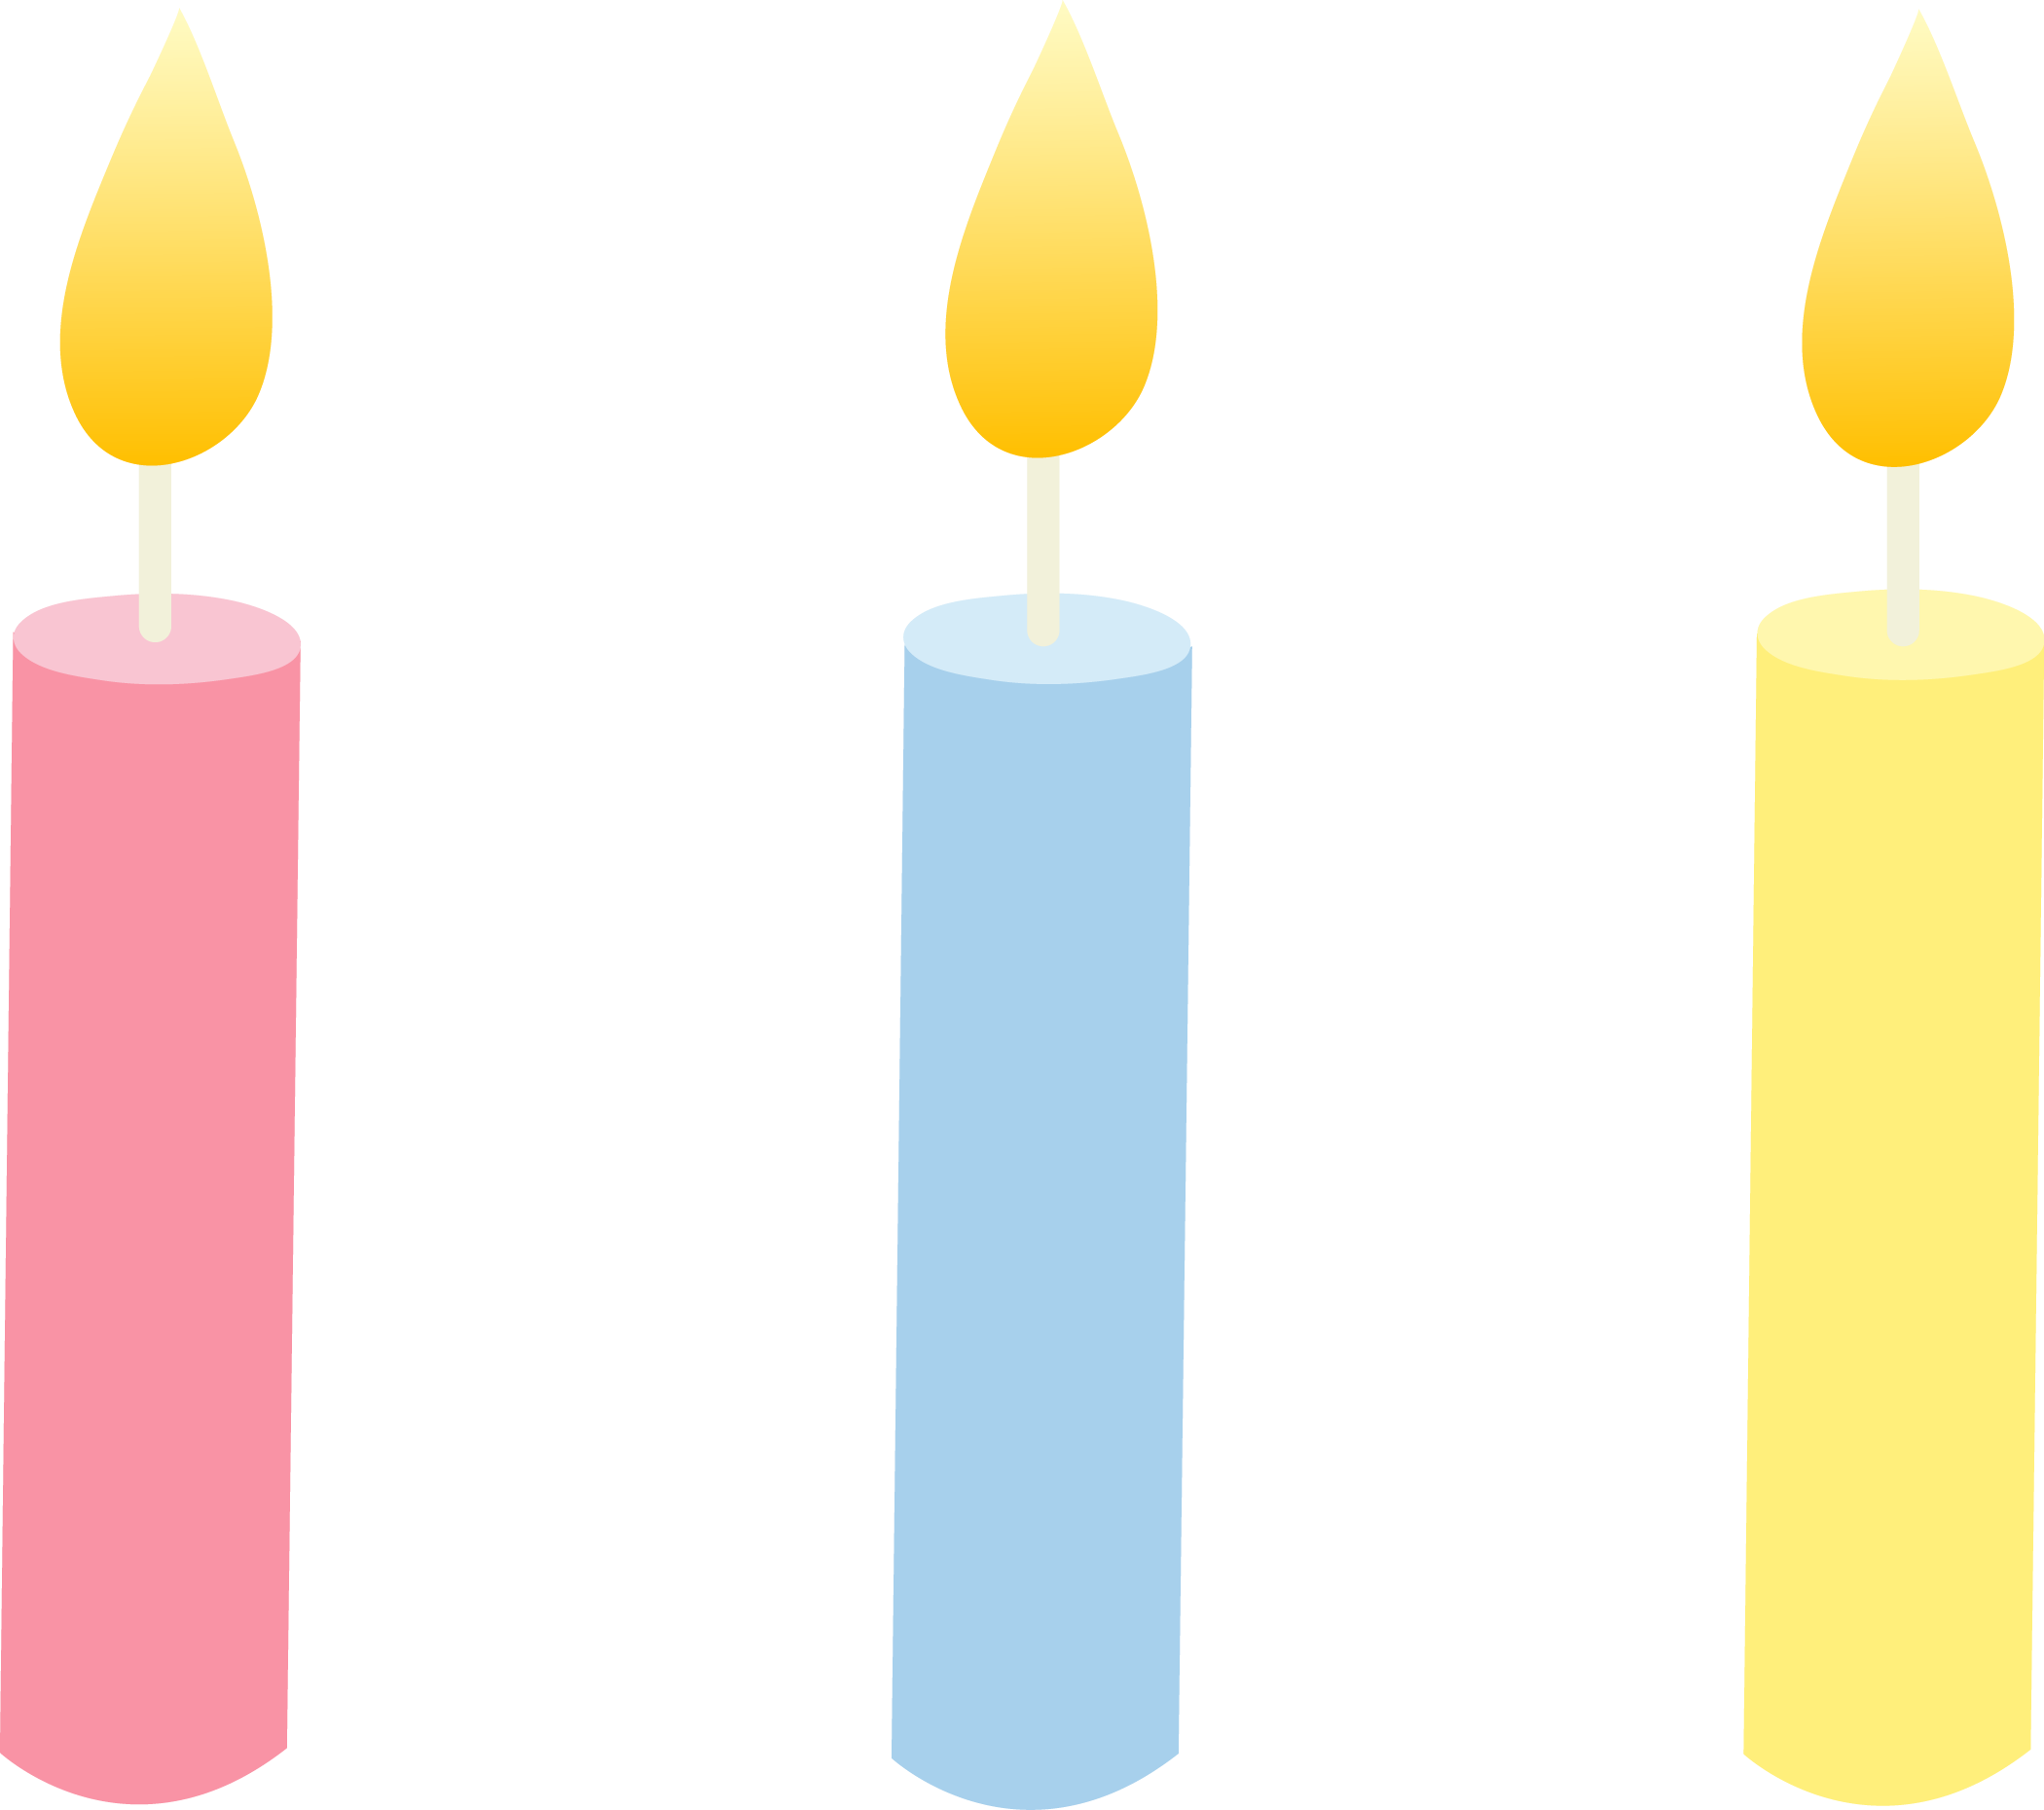 Three Pastel Colored Birthday Candles - Lit Birthday Candle Clipart (2100x1860)